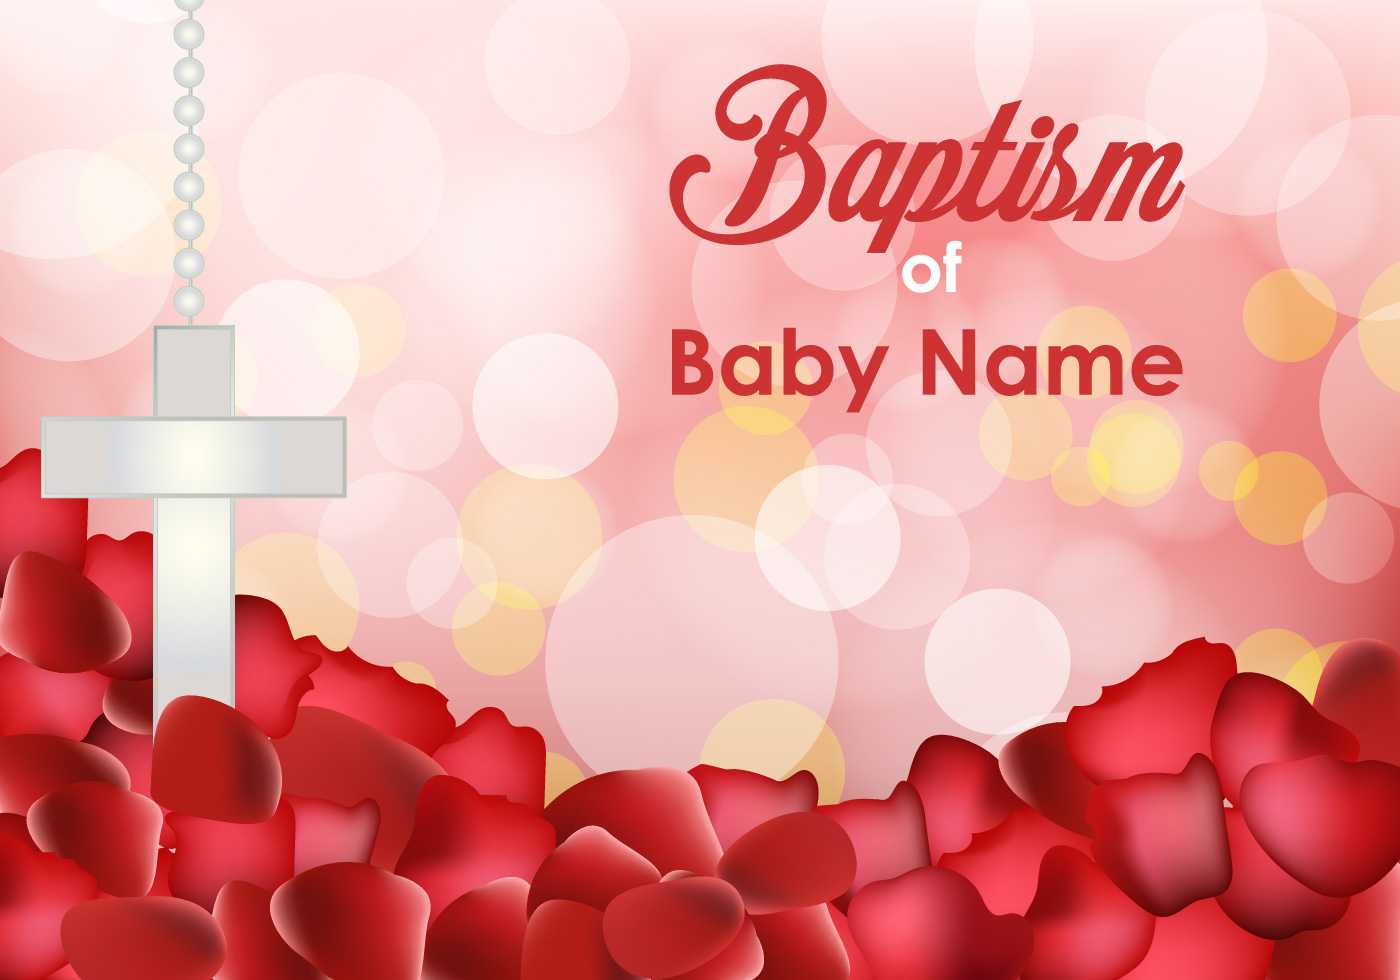 Baptism Invitation Templates – Download Free Vectors Intended For Christening Banner Template Free